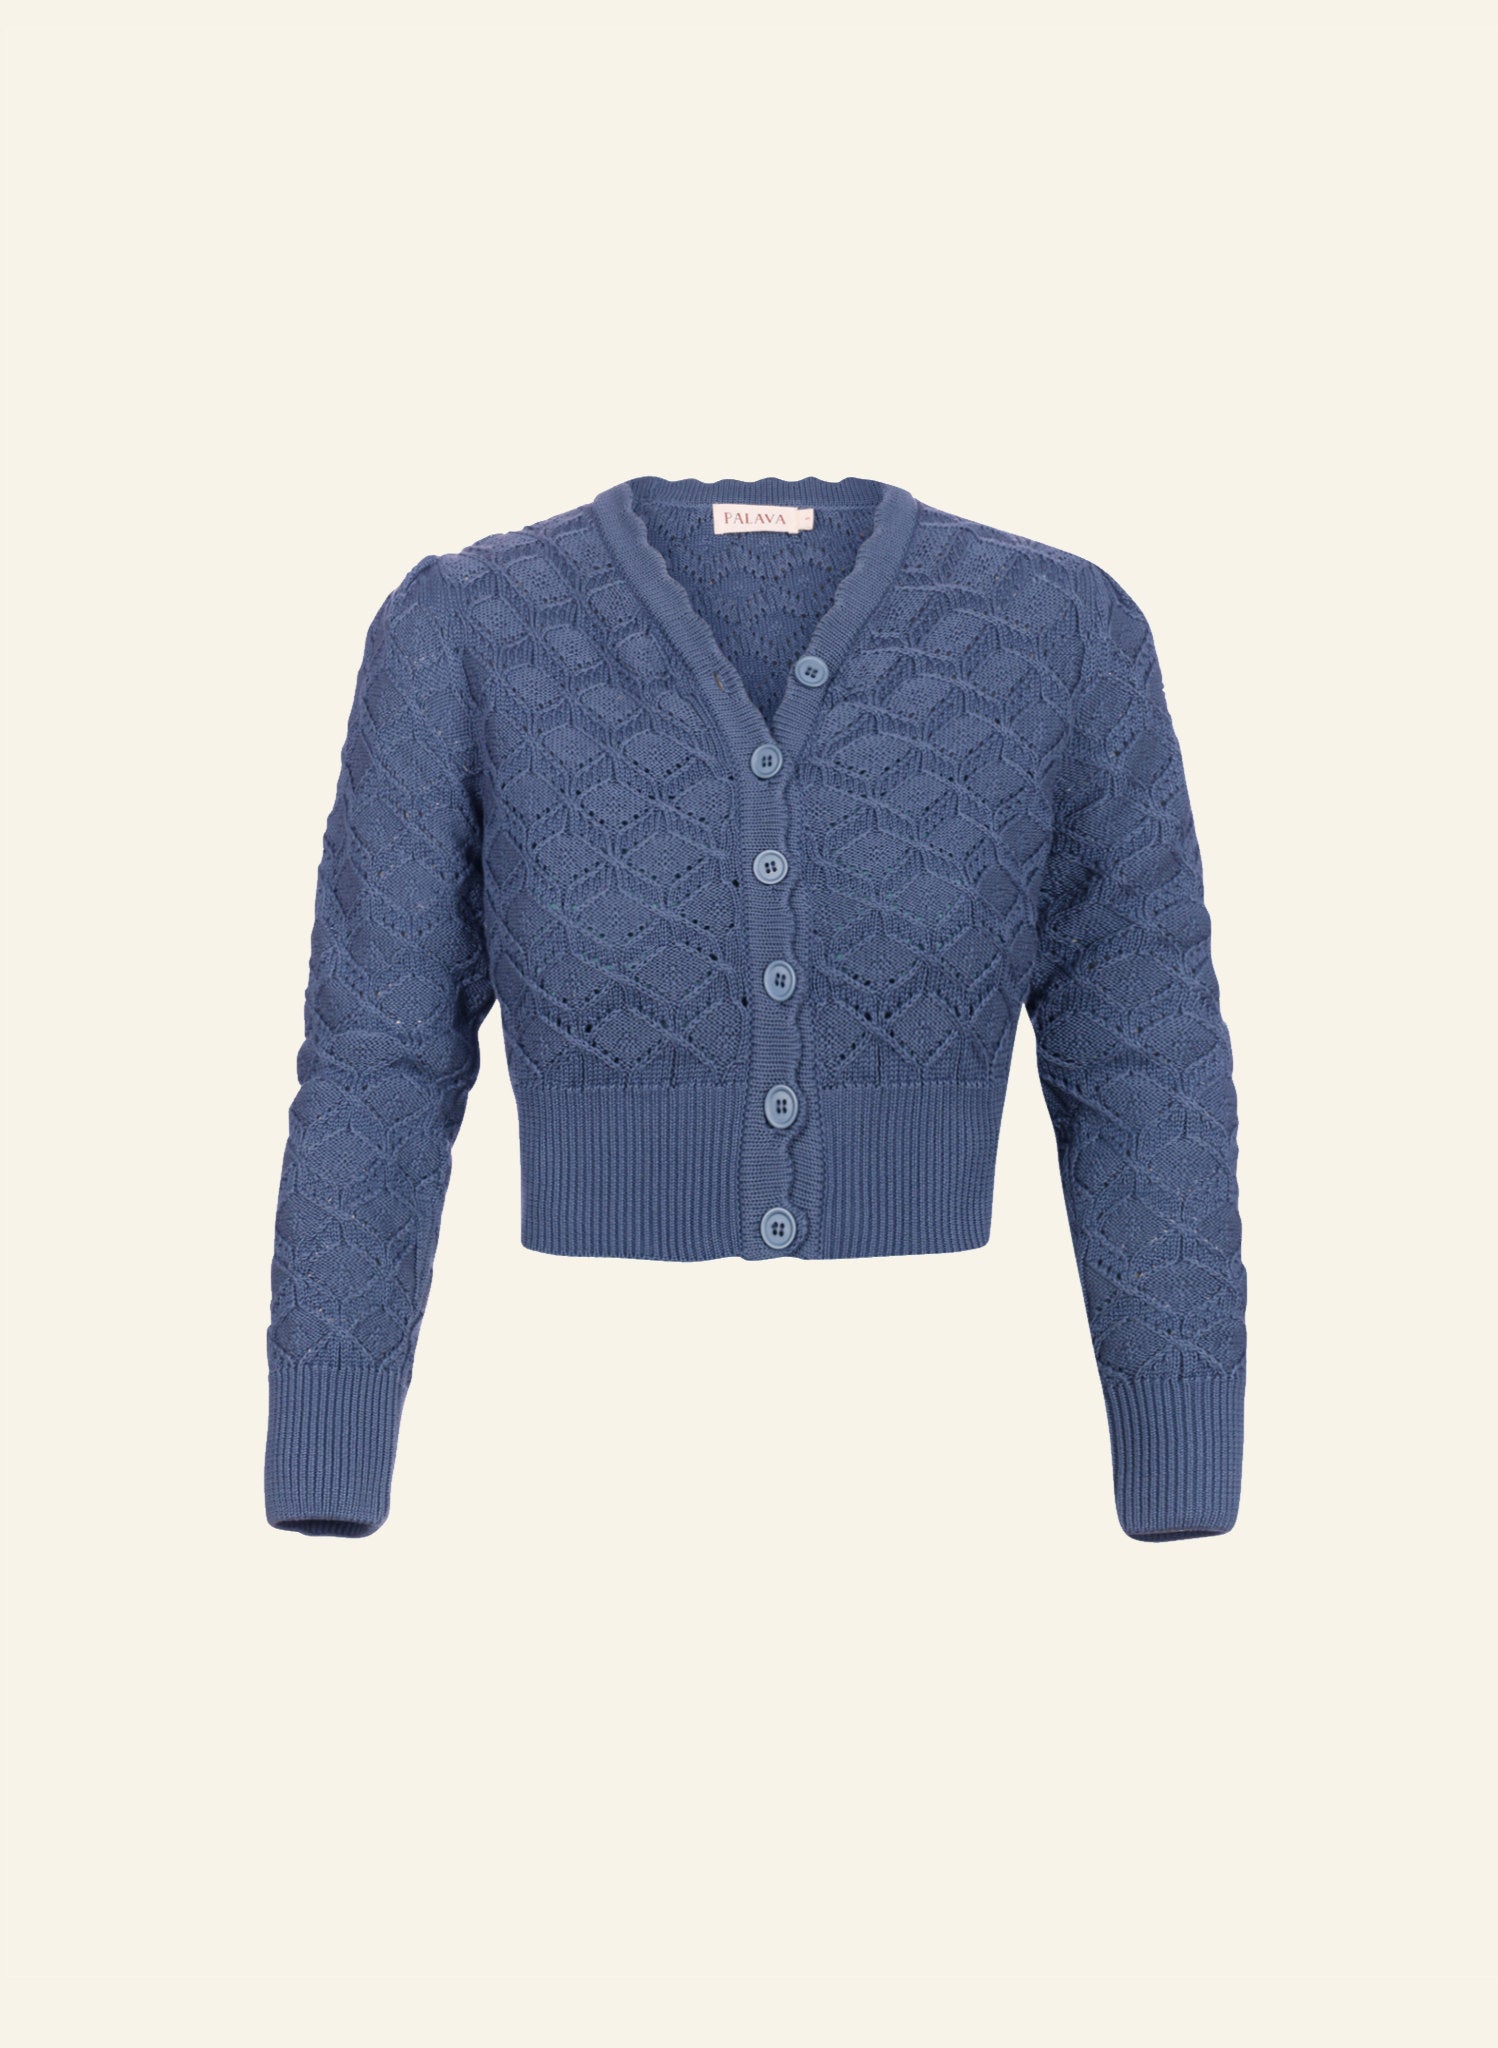 Leah - Storm Blue Basket Knitted Cardigan